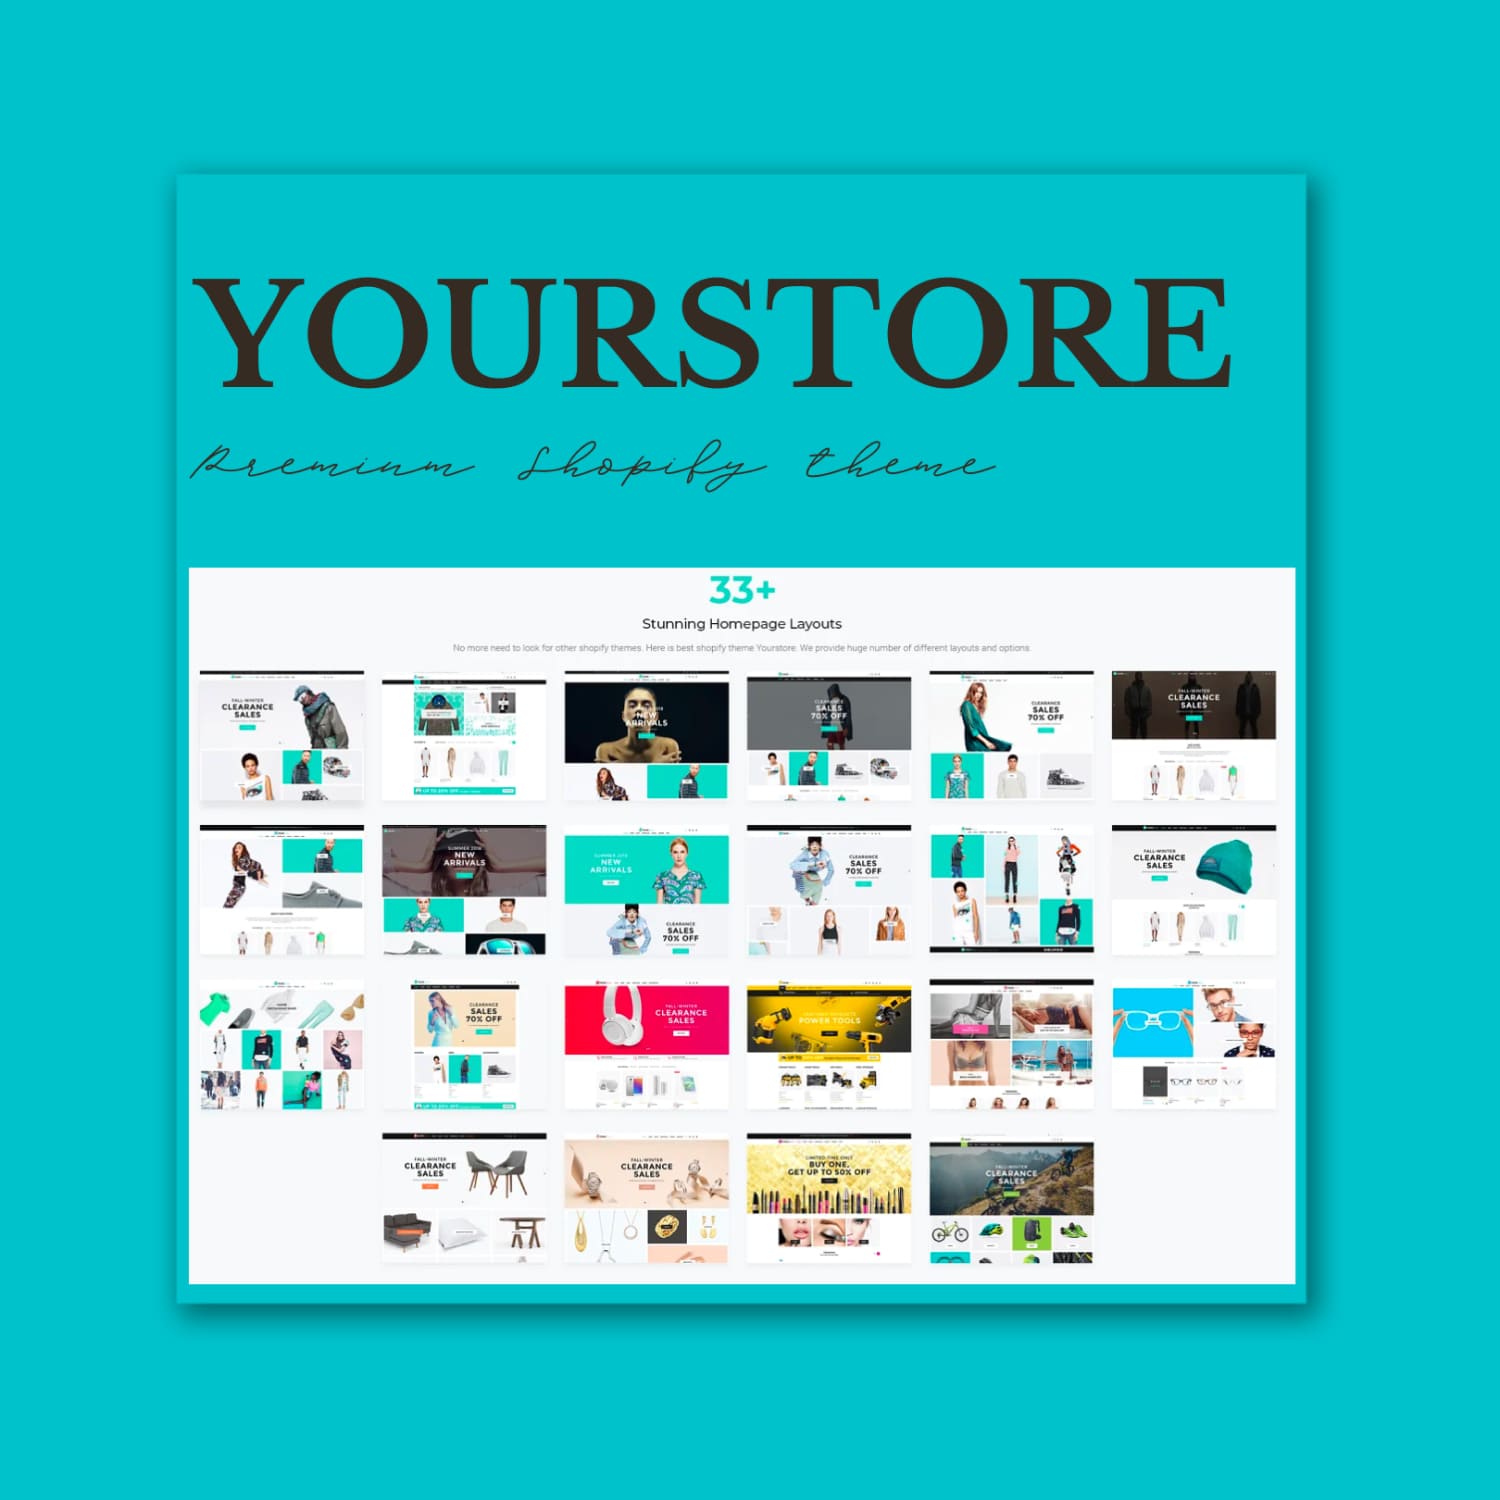 Yourstore, 33+ Stunning Homepage Layouts.